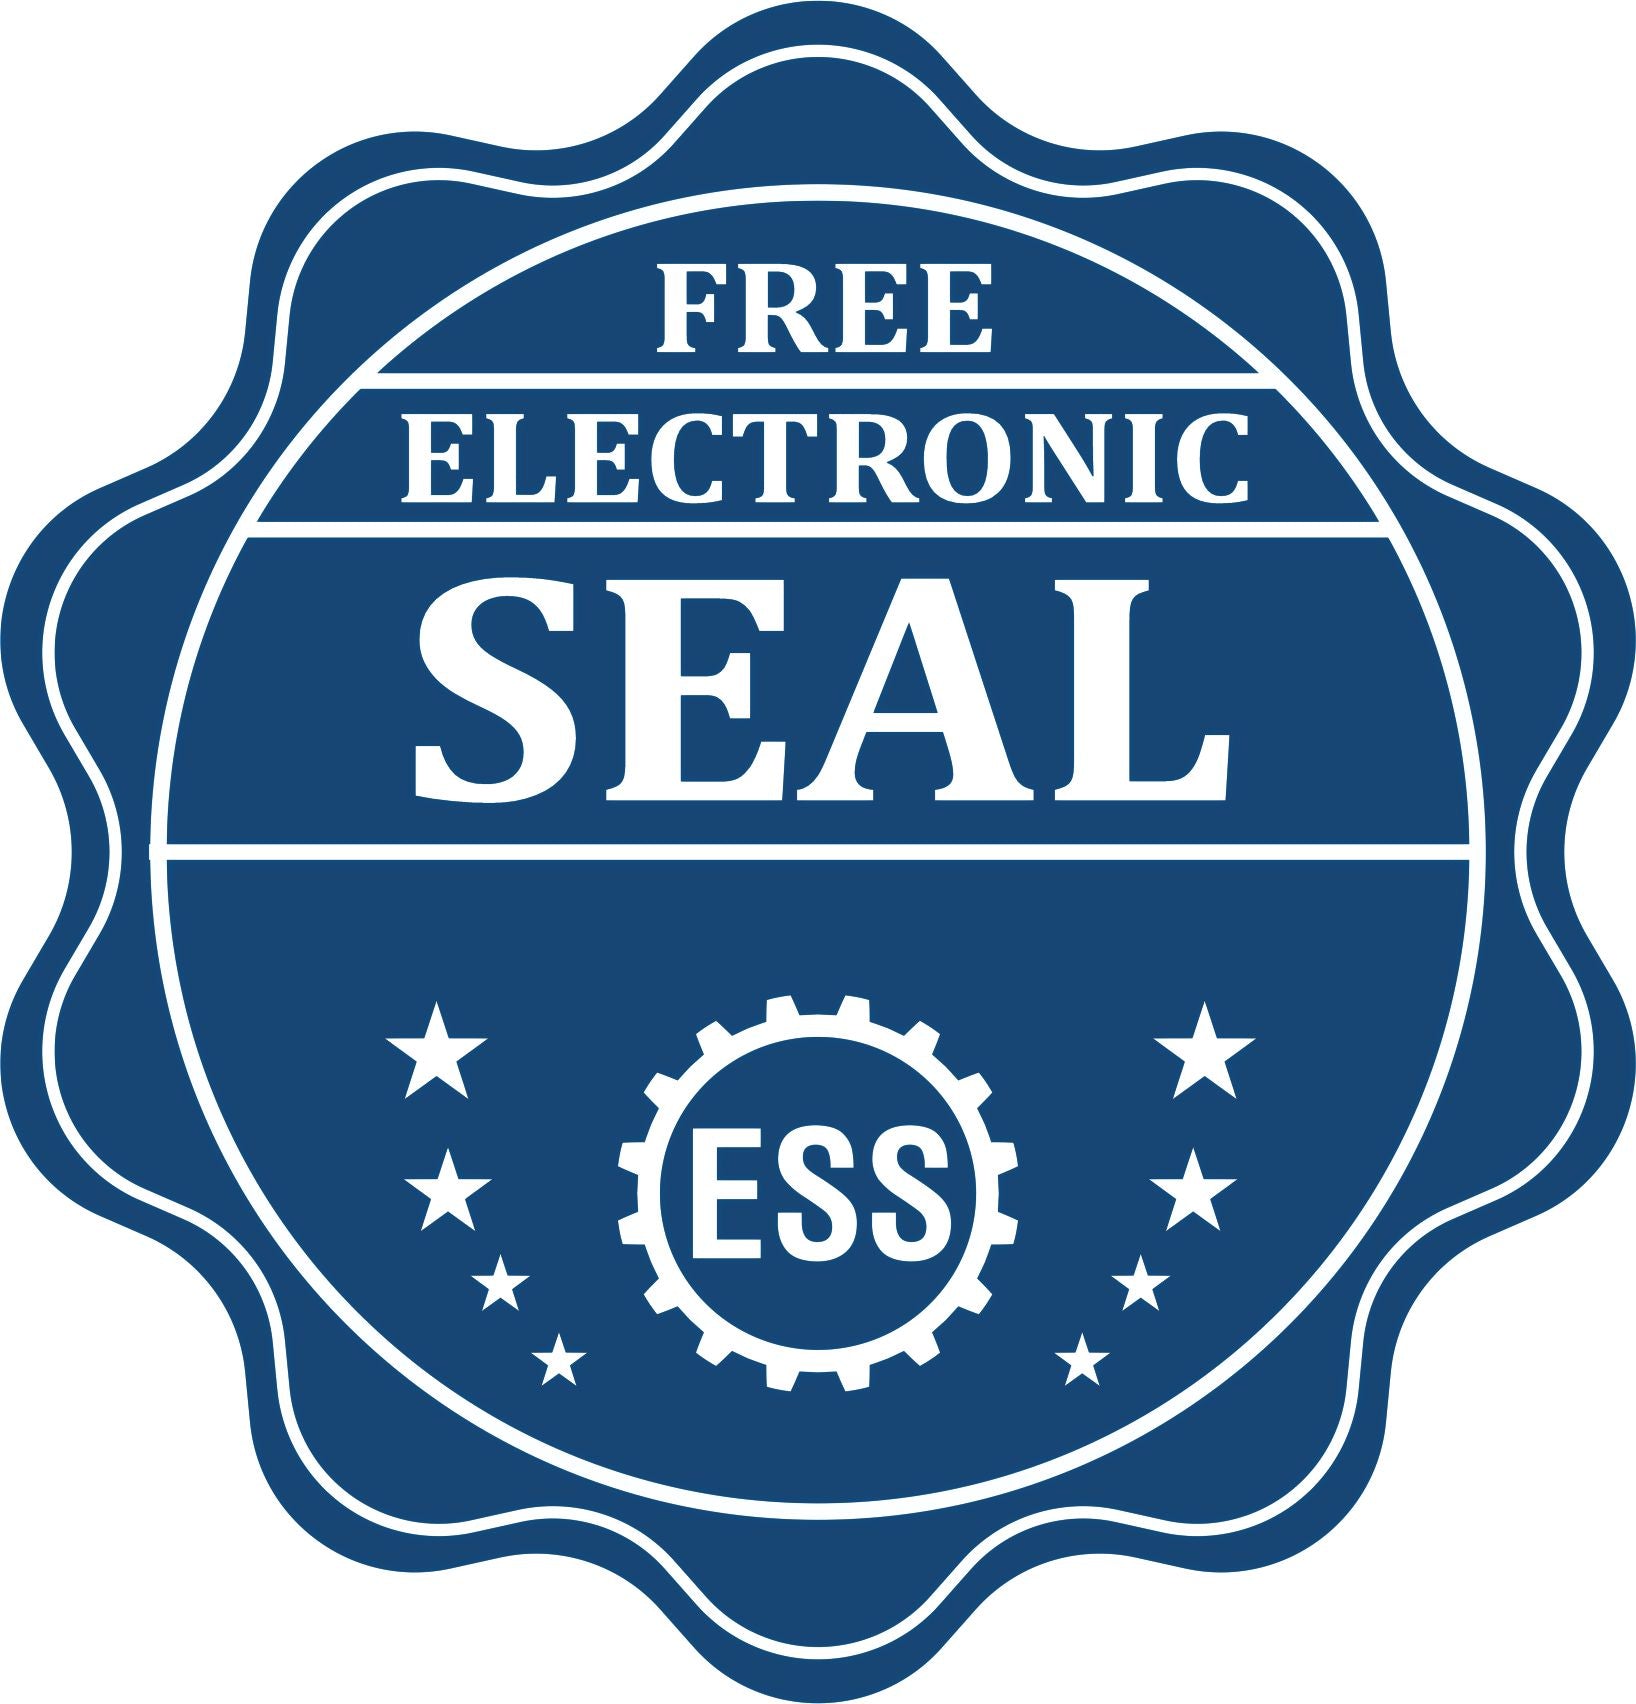 A badge showing a free electronic seal for the Gift Washington Landscape Architect Seal with stars and the ESS gear on the emblem.